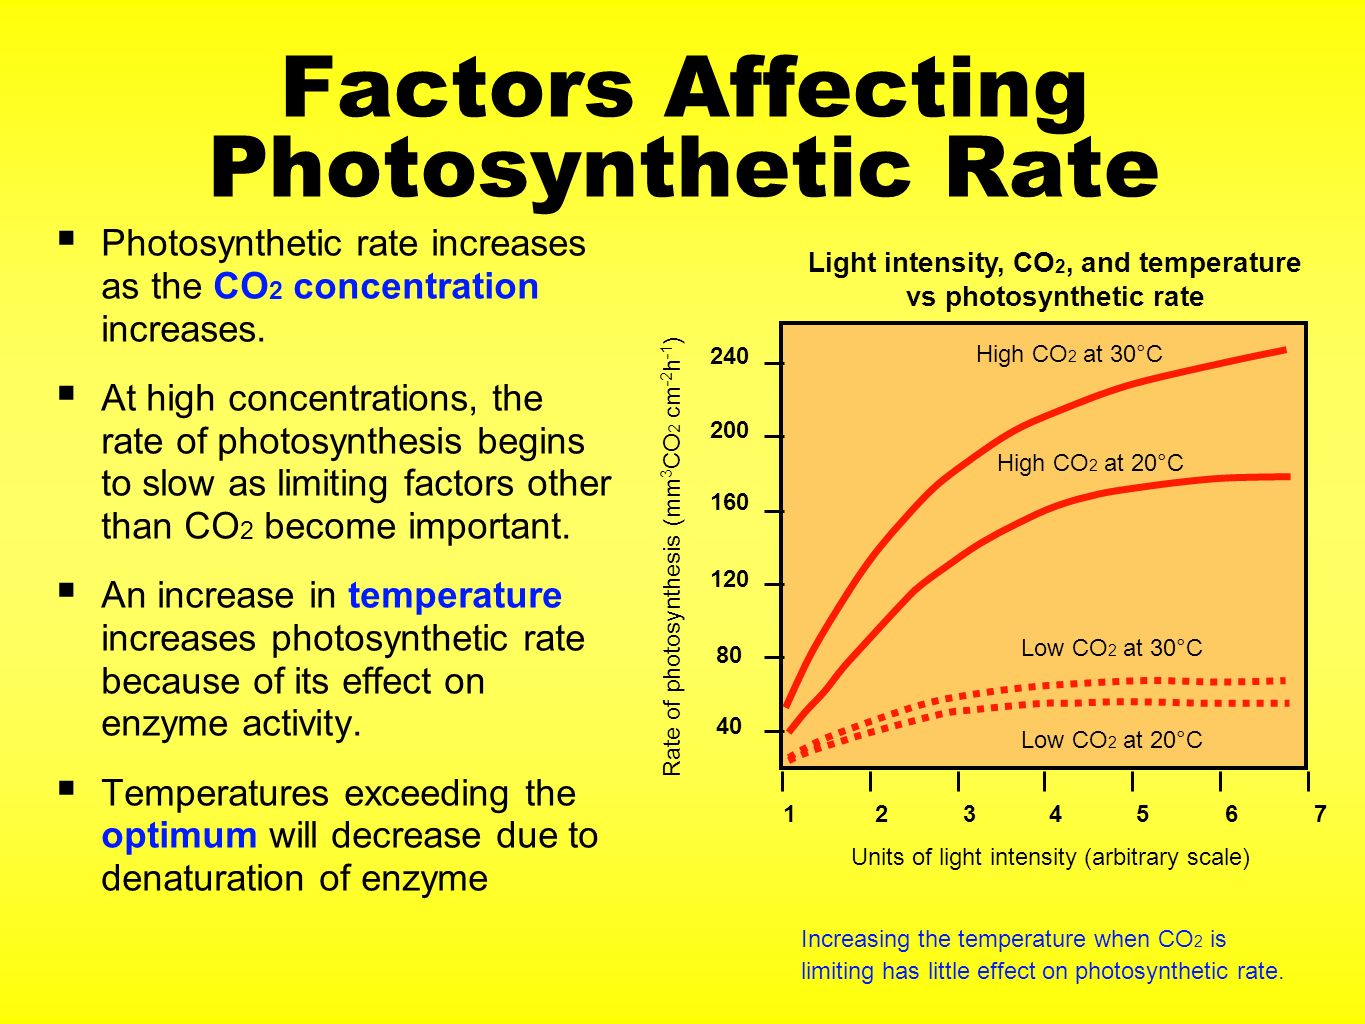 what are some factors that affect photosynthesis